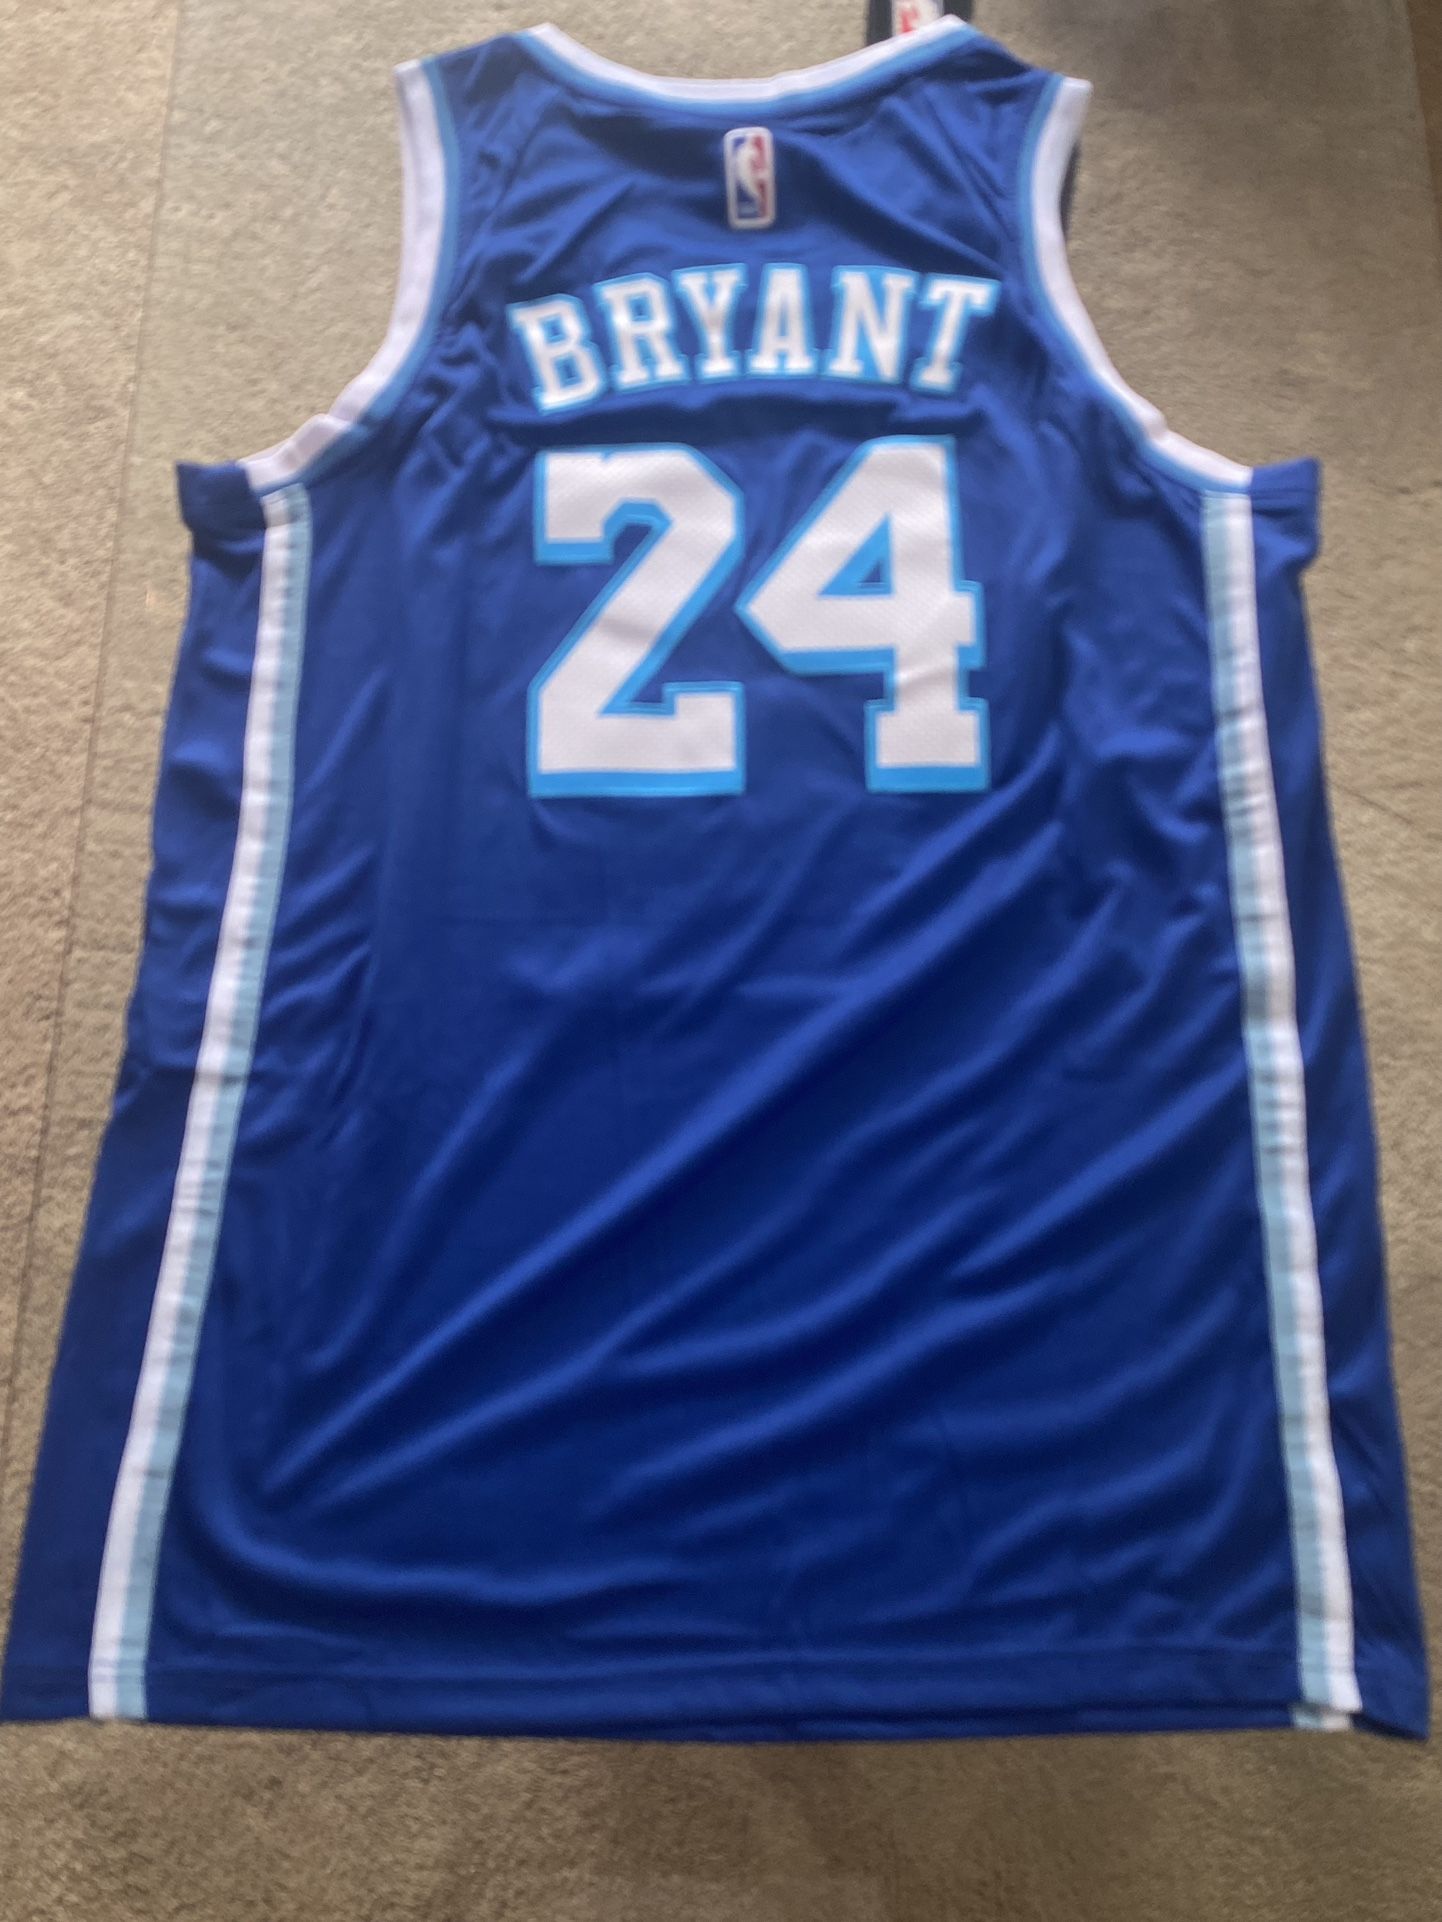 Kobe Bryant Crenshaw Jersey XL New for Sale in Los Angeles, CA